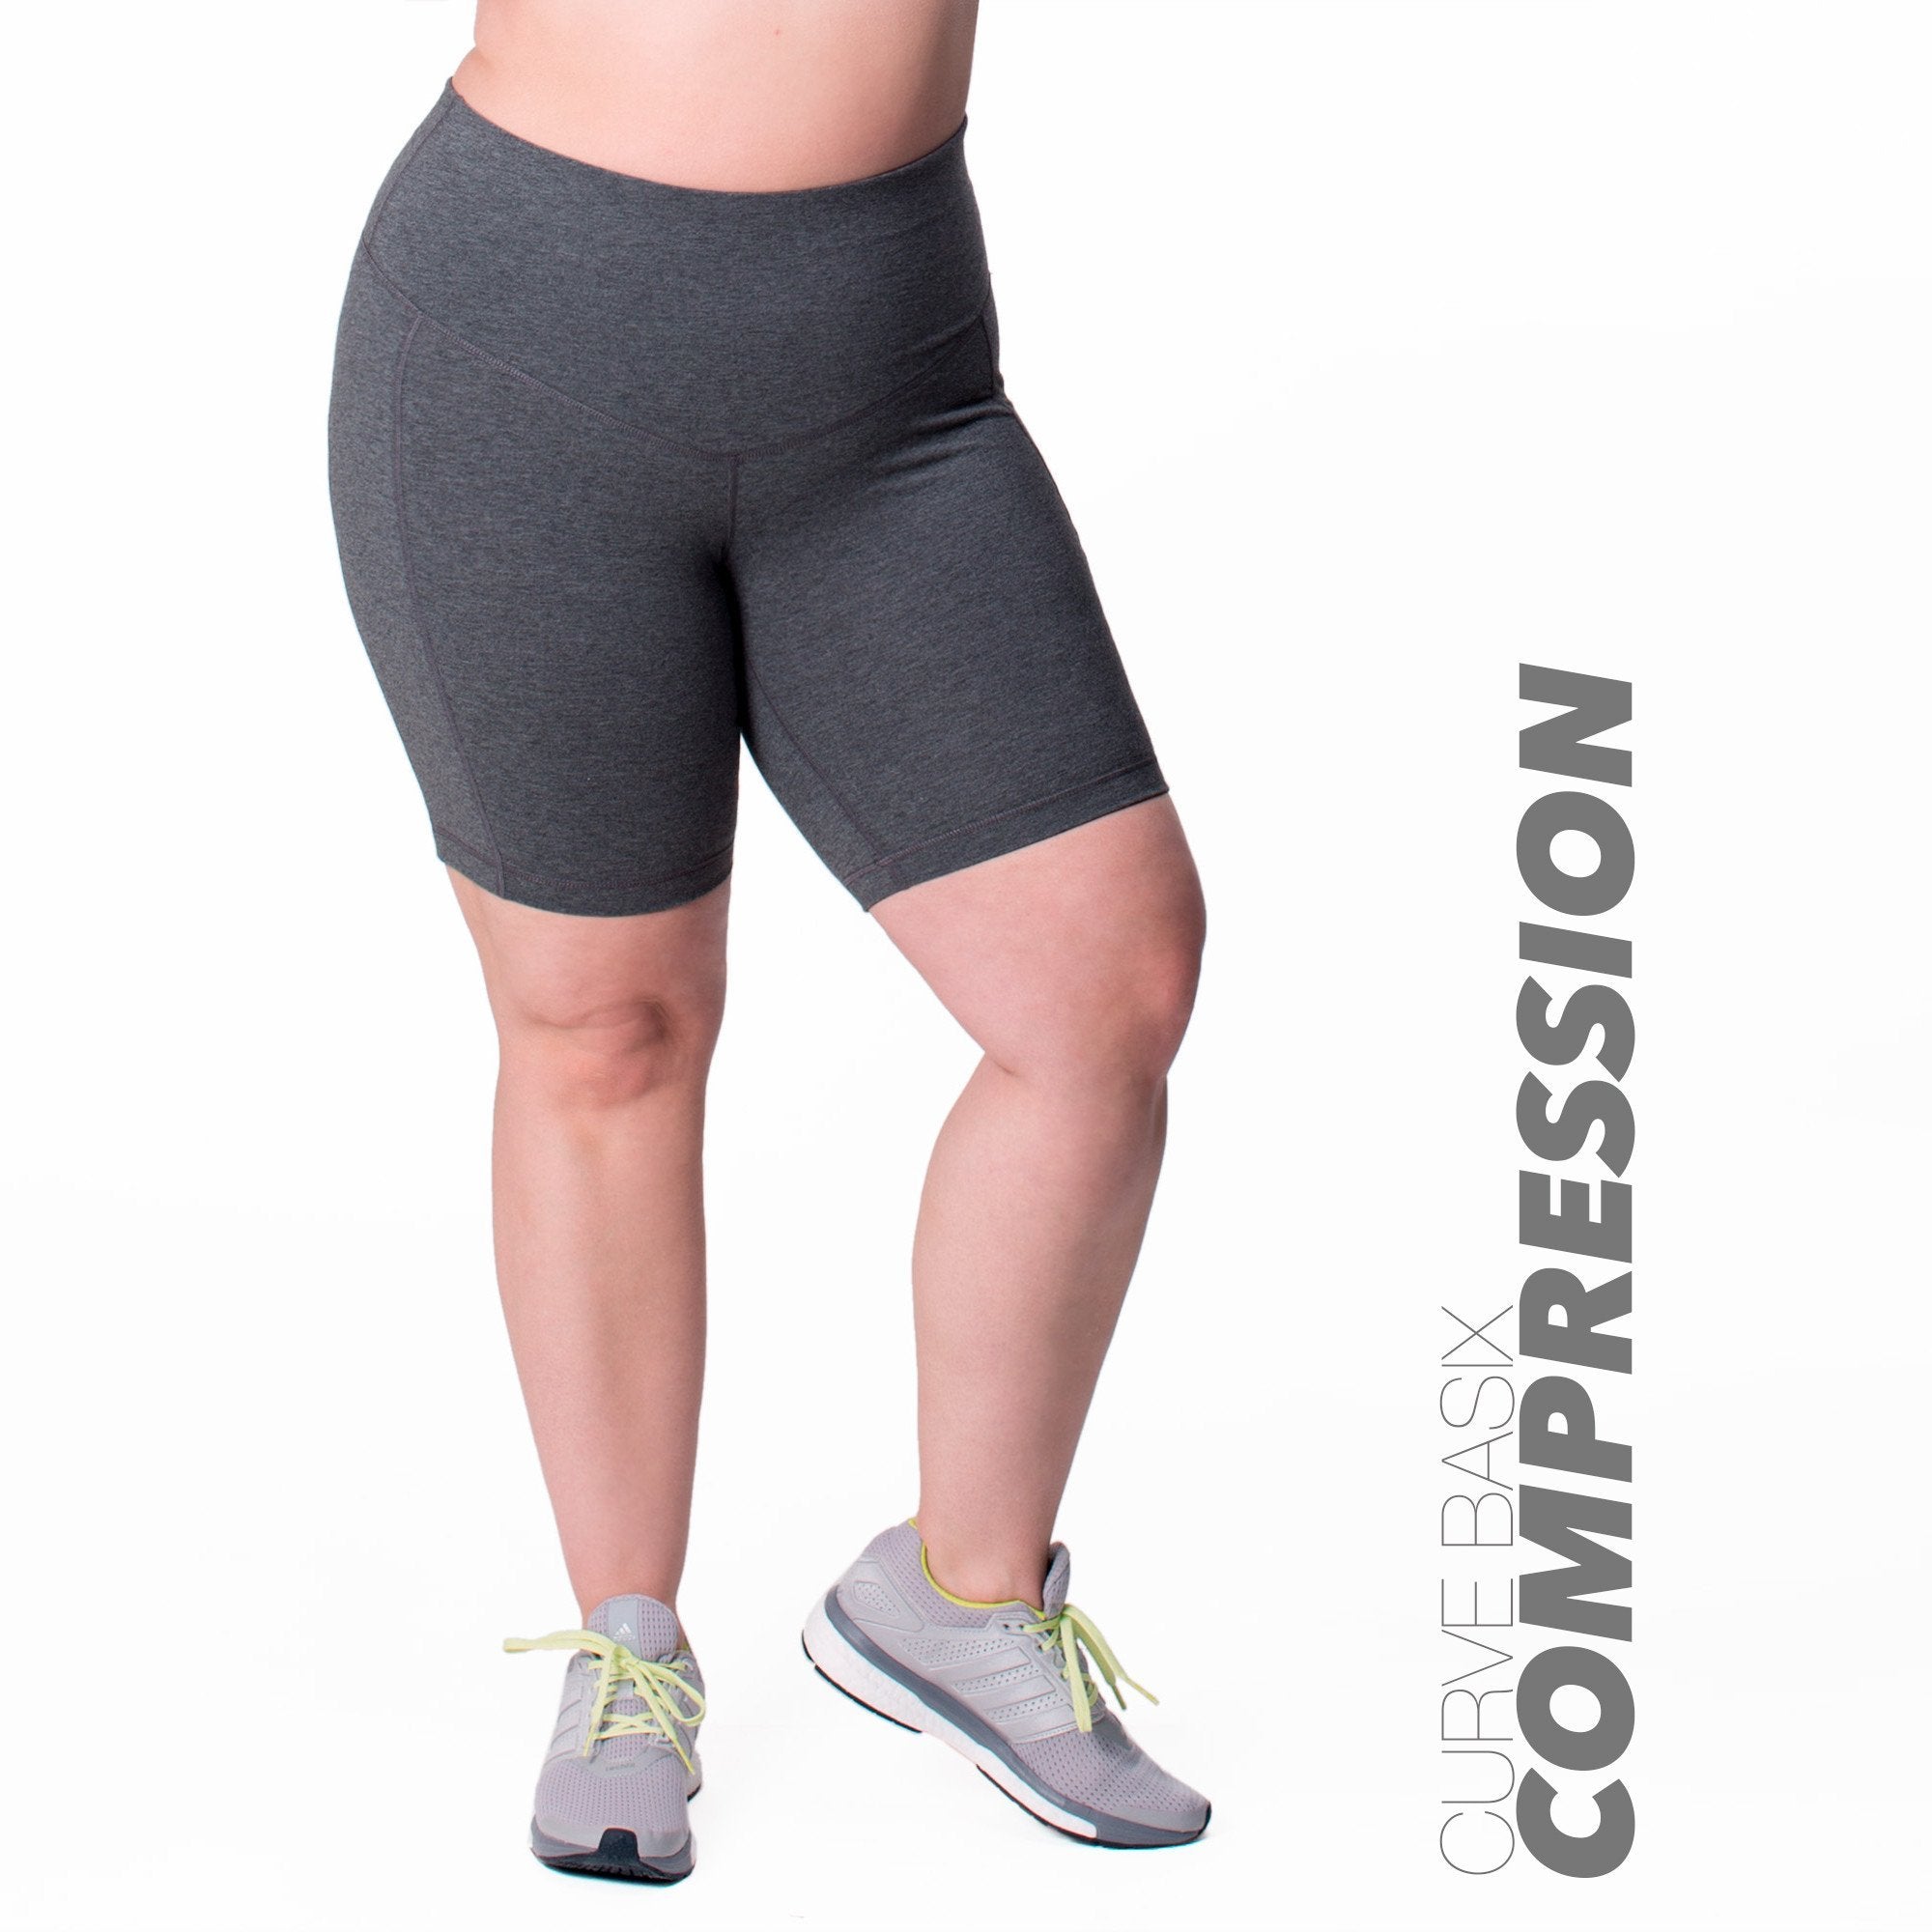 Curve Basix Compression Bike Short - Rainbeau Curves, 14/16 / Charcoal, activewear, athleisure, fitness, workout, gym, performance, womens, ladies, plus size, curvy, full figured, spandex, cotton, polyester - 1